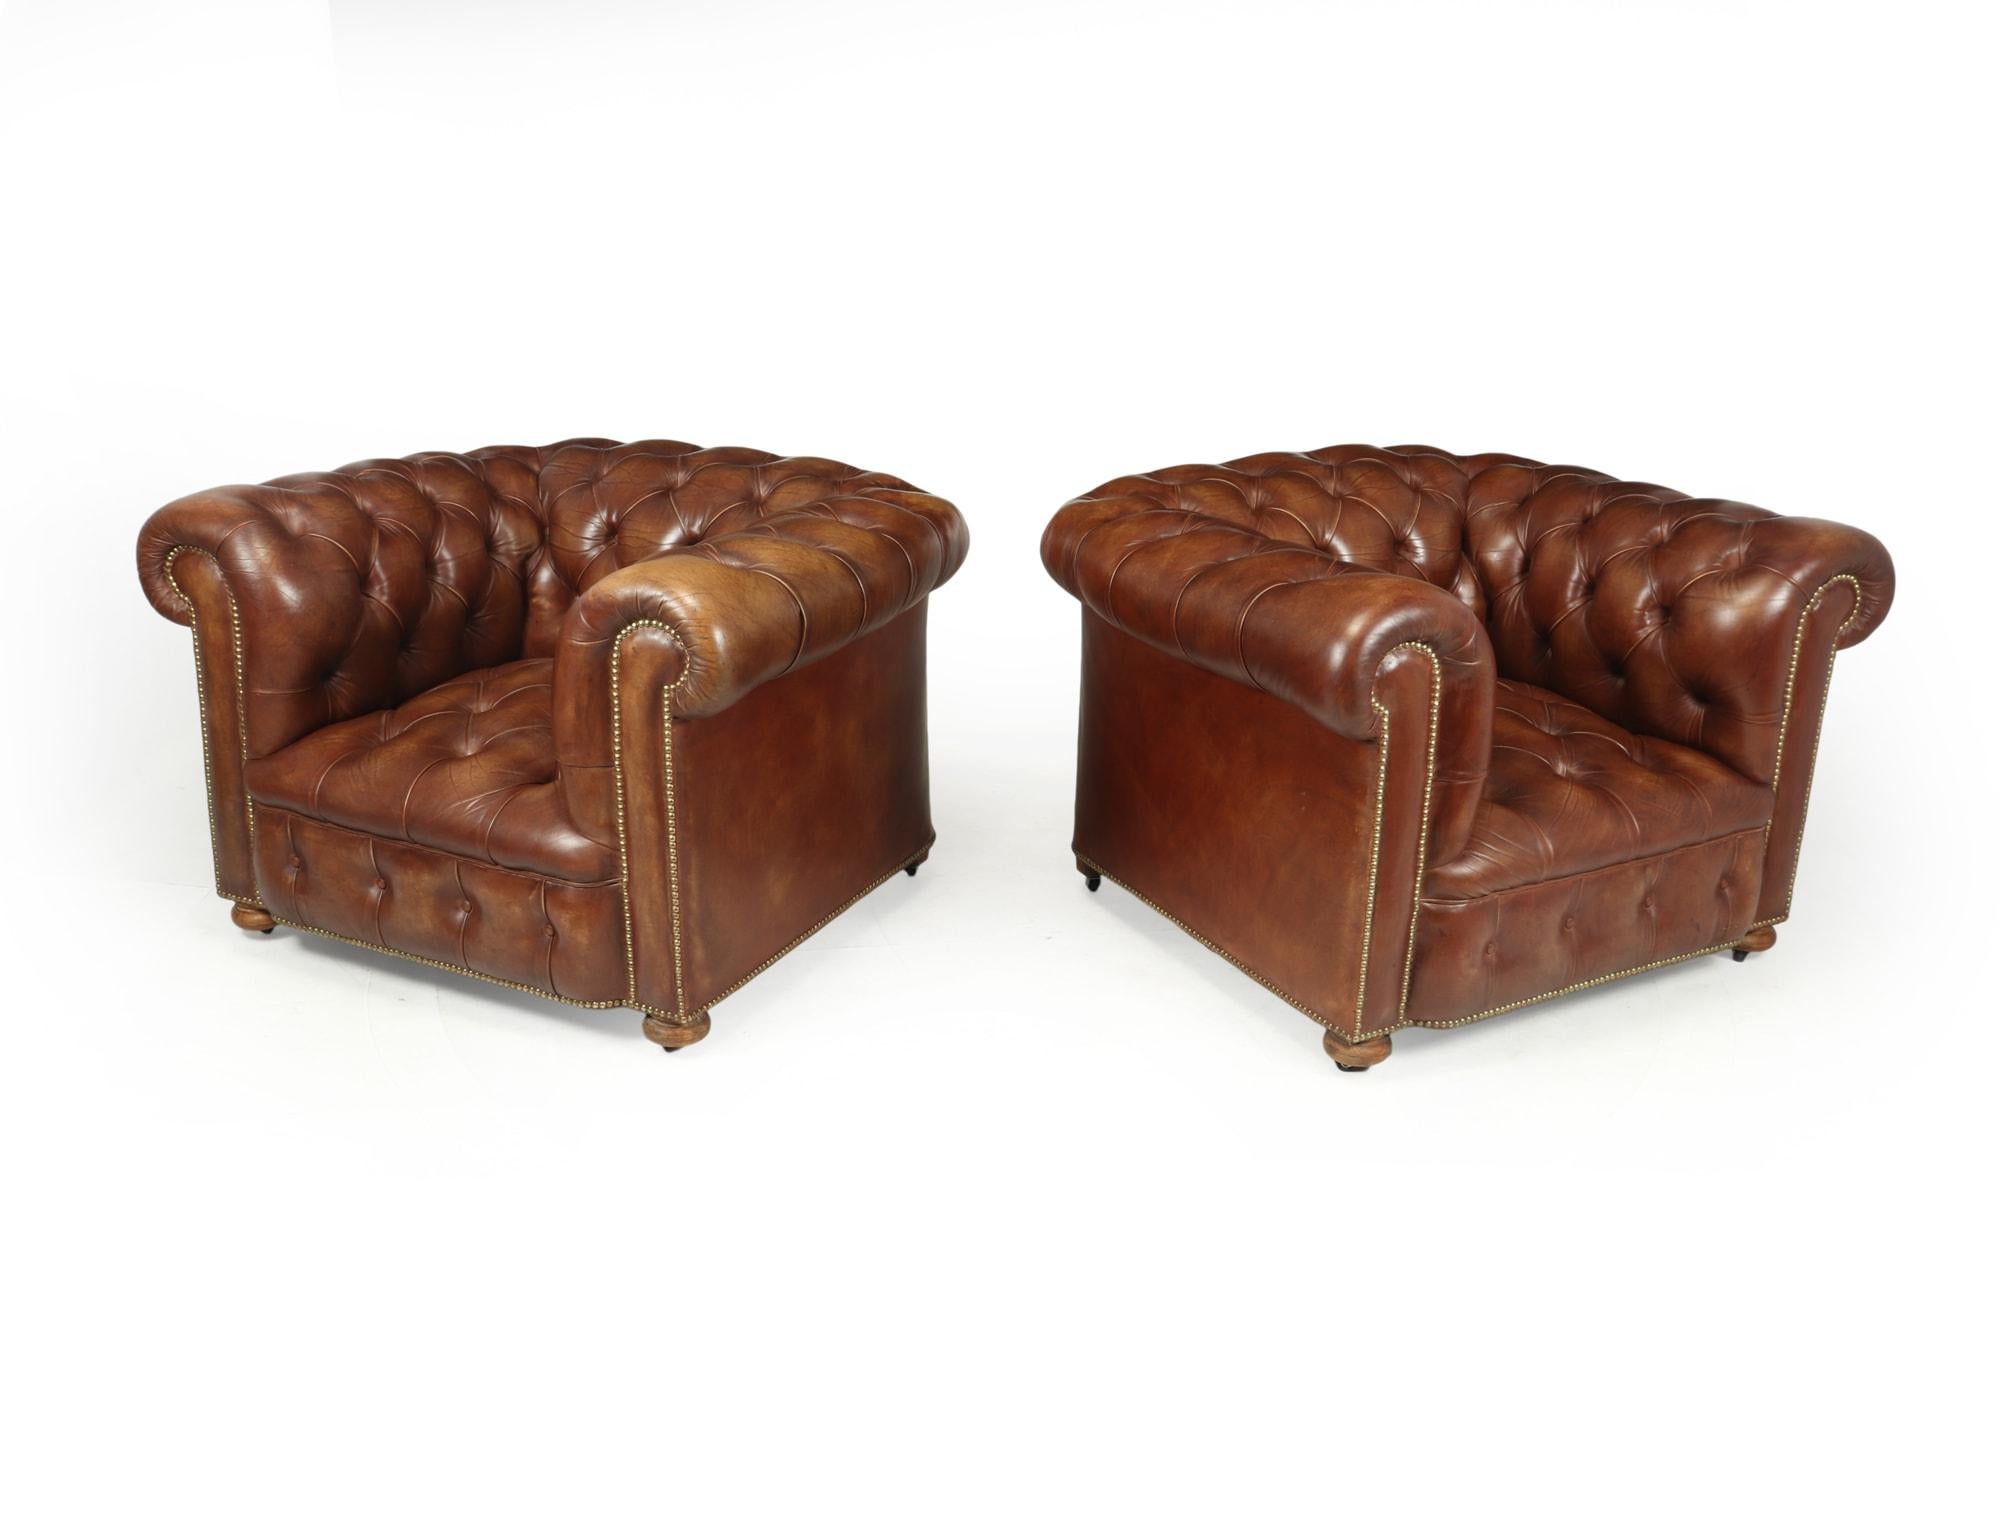 Other Vintage Leather Chesterfield Club Chairs